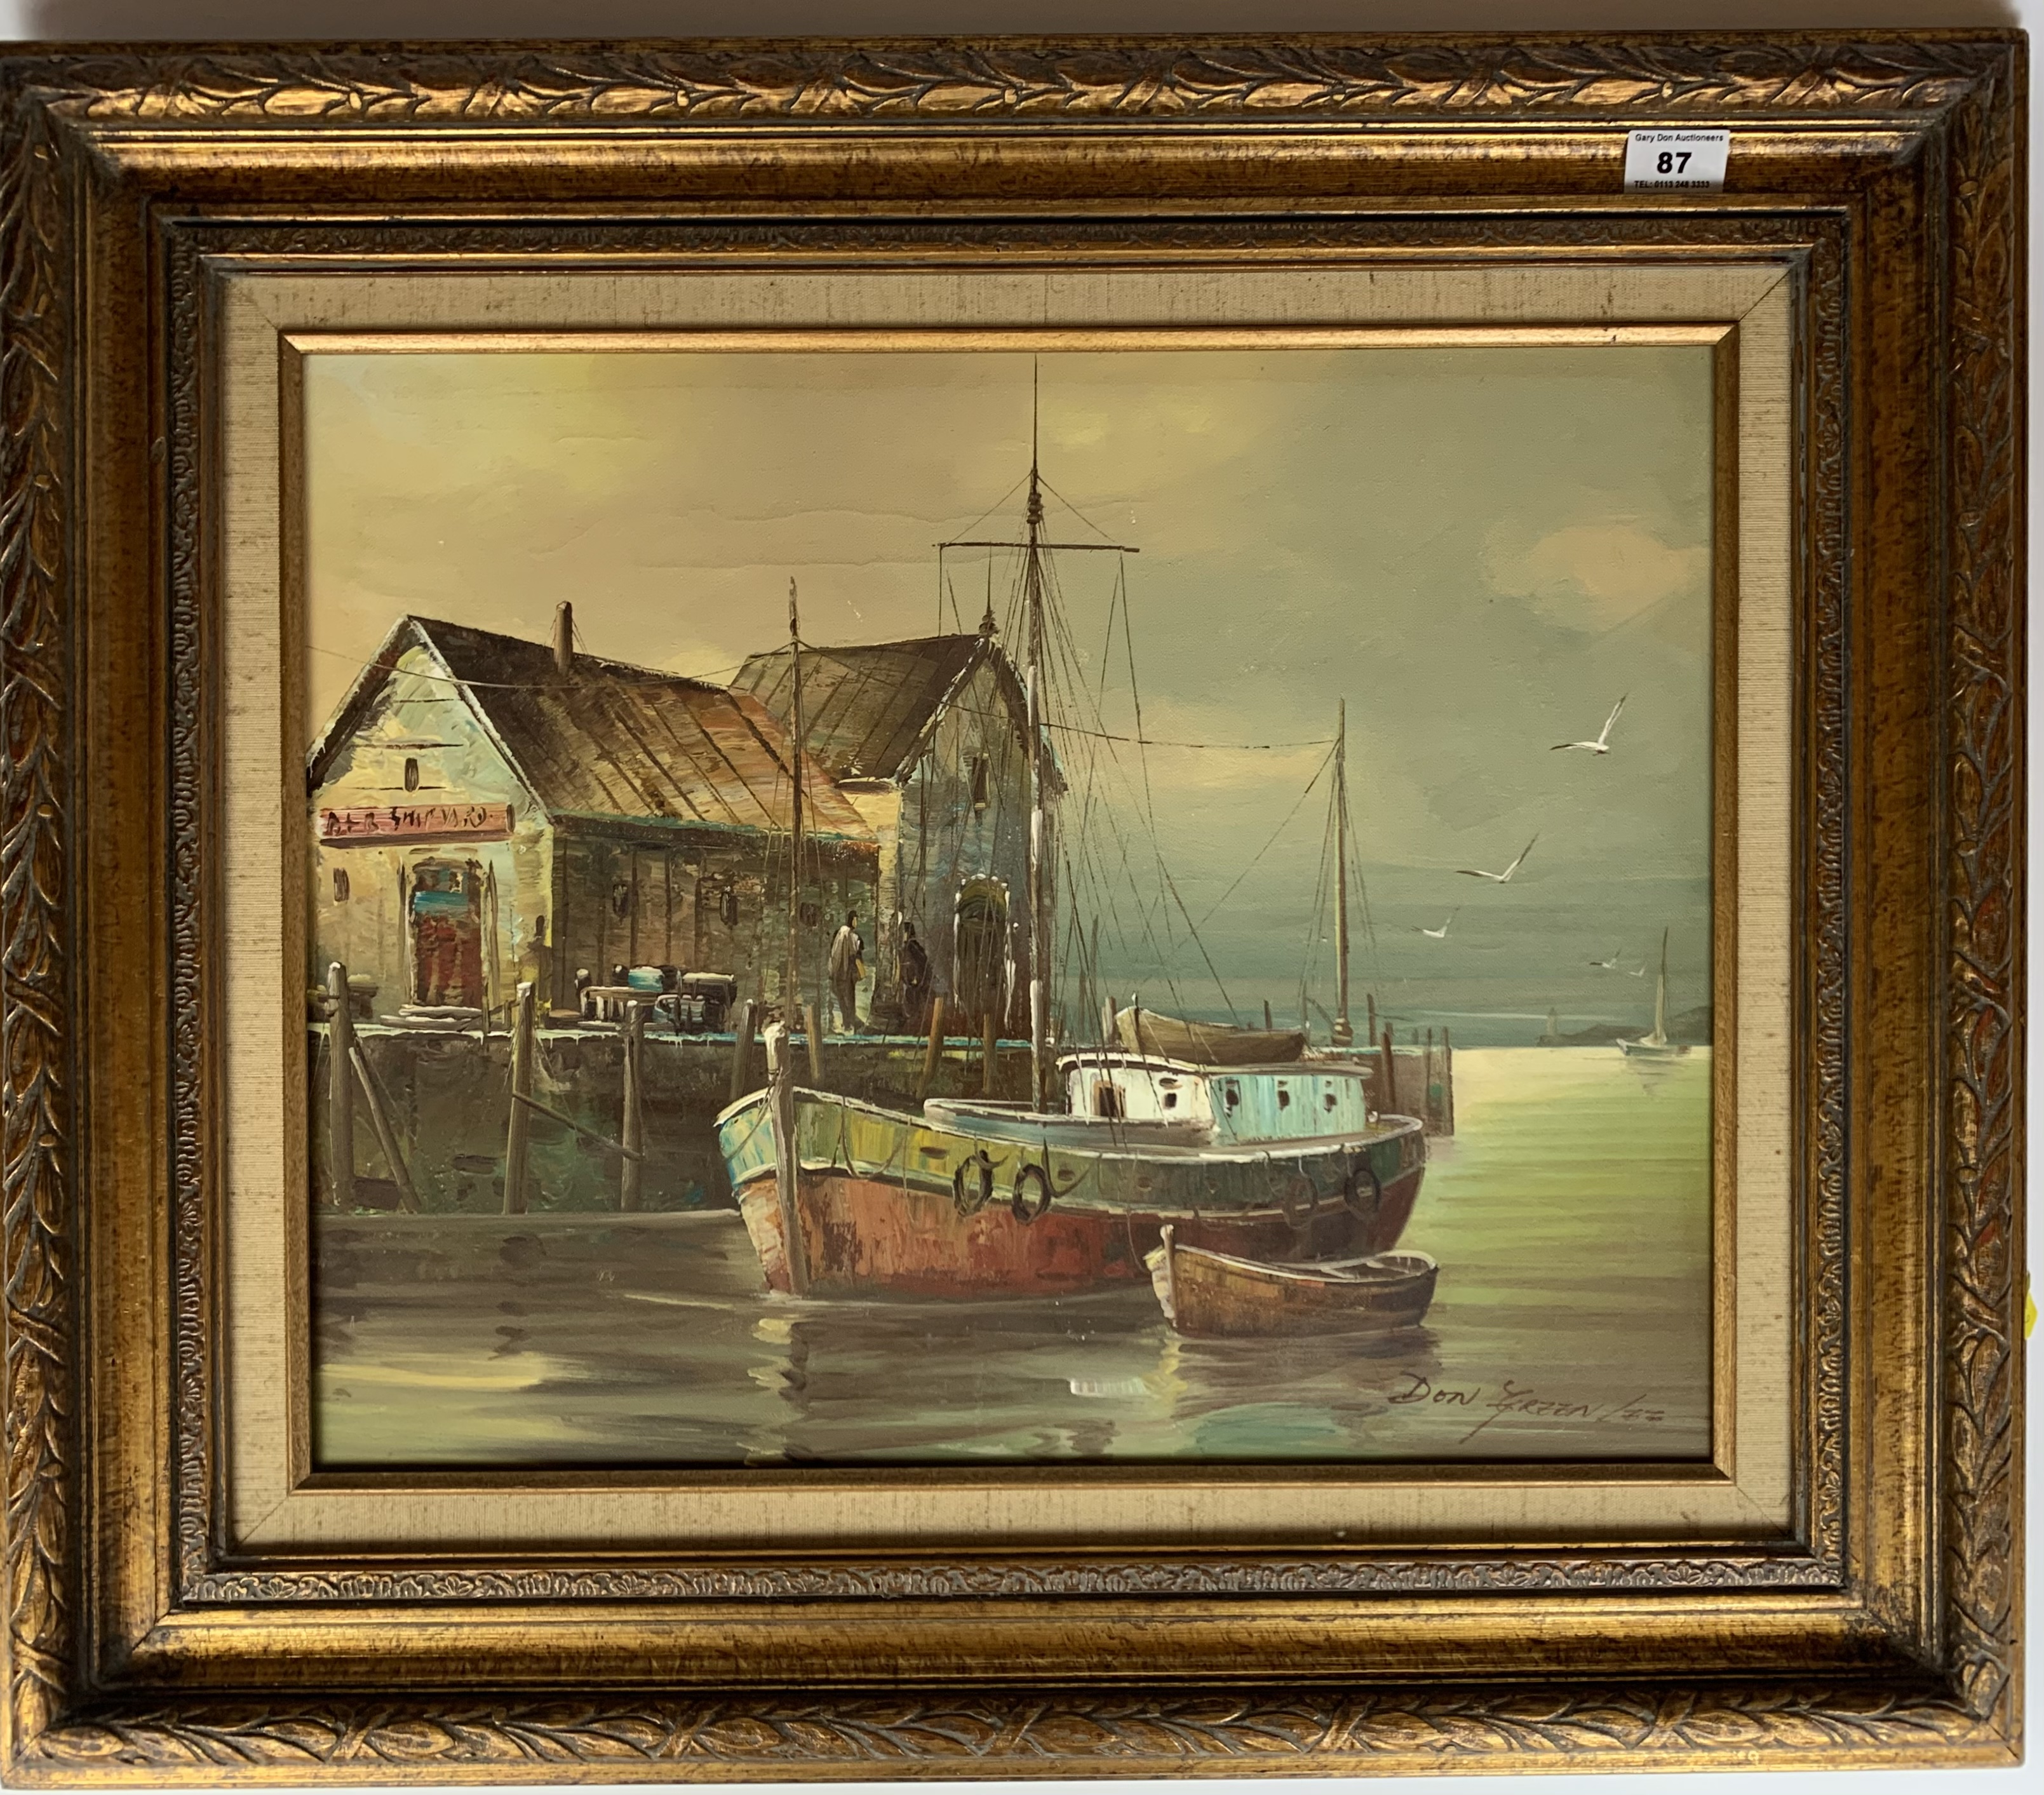 Oil painting of shipyard by Don Green Lee, 19.5” x 15.5”, frame 28” x 24”